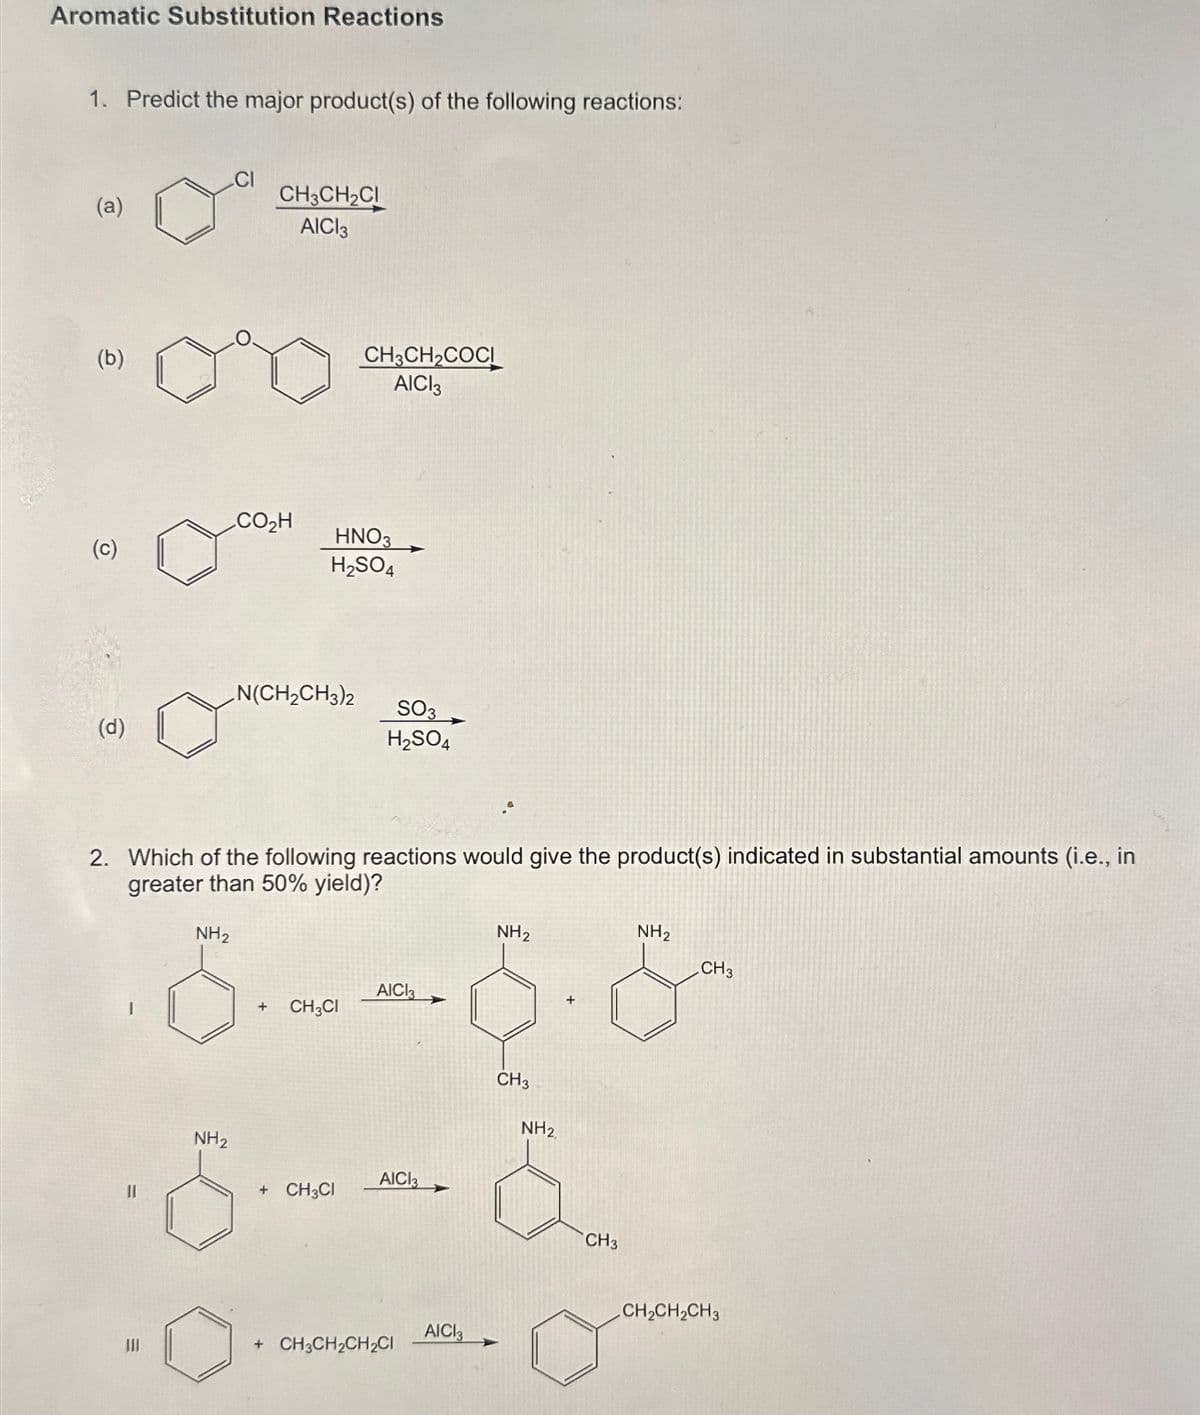 Aromatic Substitution Reactions
1. Predict the major product(s) of the following reactions:
CI
(a)
CH3CH2CI
AICI 3
(b)
CH3CH2COCI
AICI3
CO₂H
(c)
HNO3
H2SO4
N(CH2CH3)2
(d)
SO3
H2SO4
2. Which of the following reactions would give the product(s) indicated in substantial amounts (i.e., in
greater than 50% yield)?
NH2
AICI3
NH2
NH2
CH3
6--6-8
NH2
+ CH3CI
AICI3
CH3
NH2
+ CH3CI
+ CH3CH2CH2CI
AICI 3
CH3
CH2CH2CH3